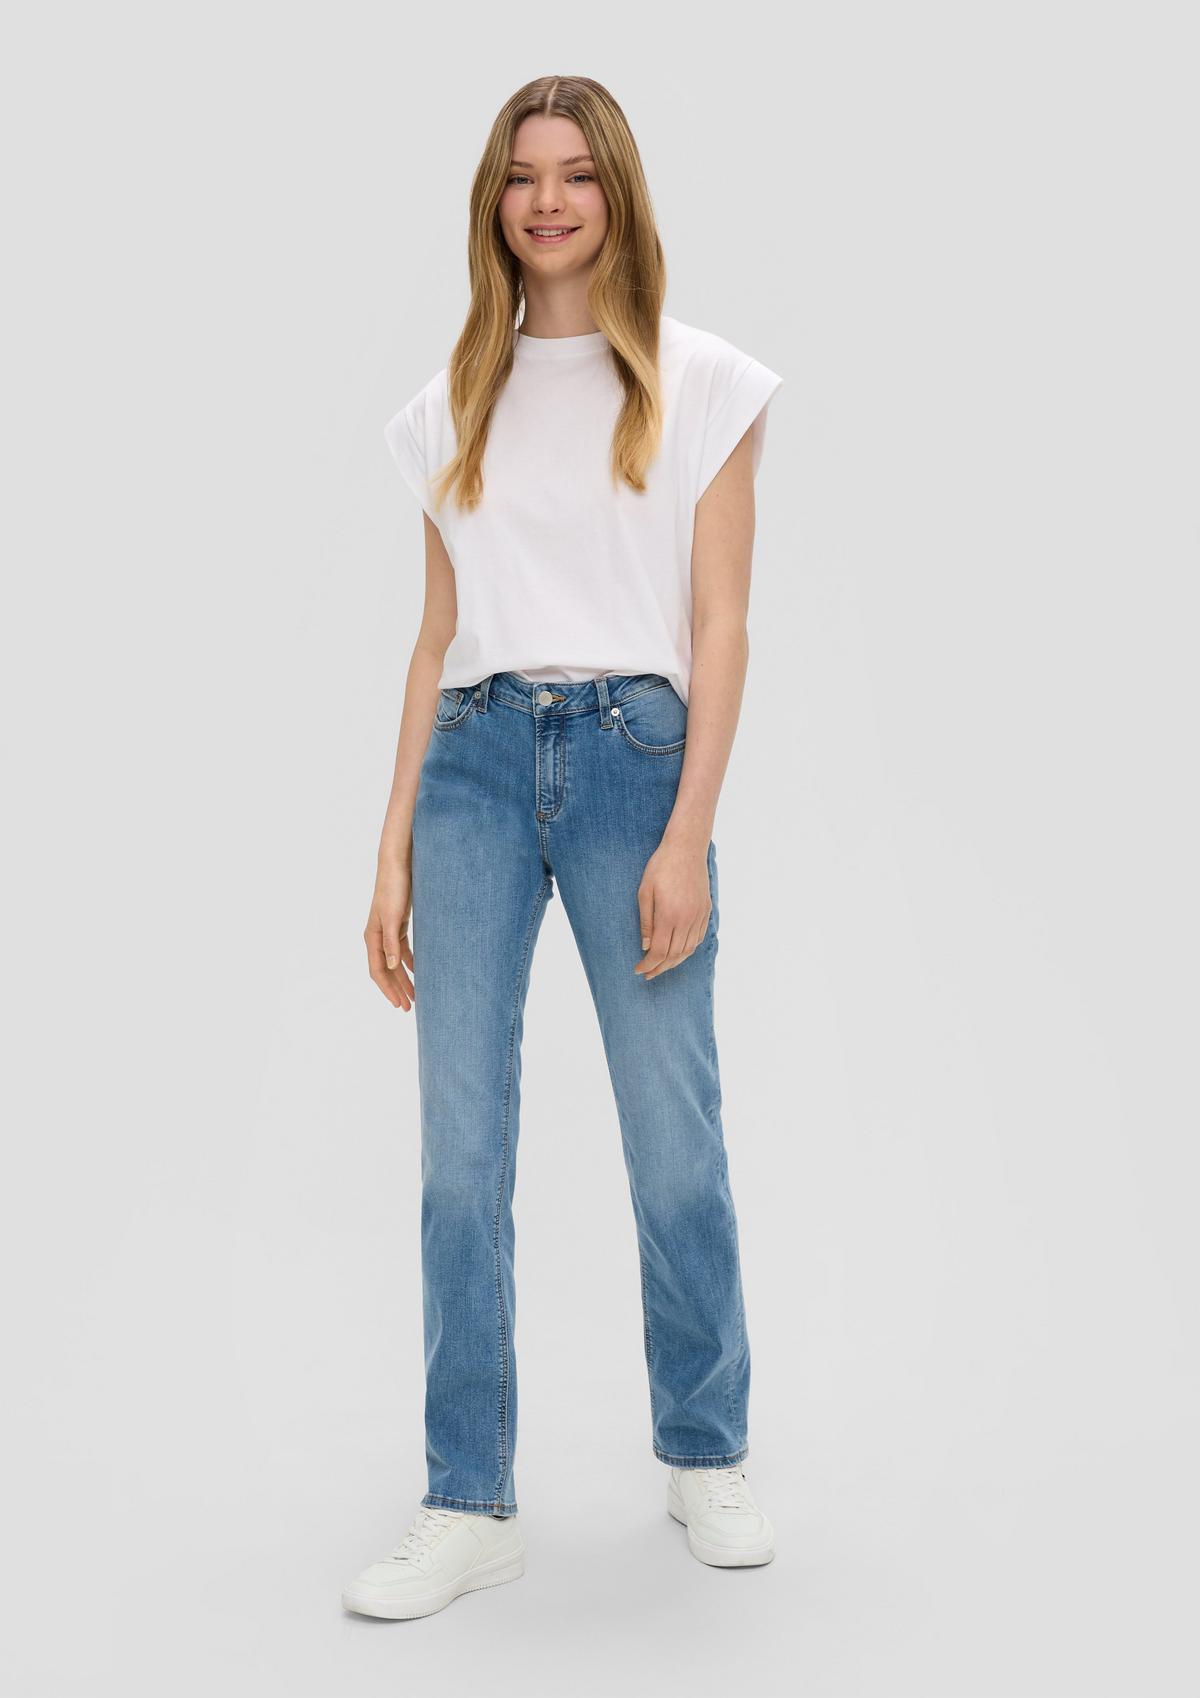 s.Oliver Catie jeans / mid rise / straight leg